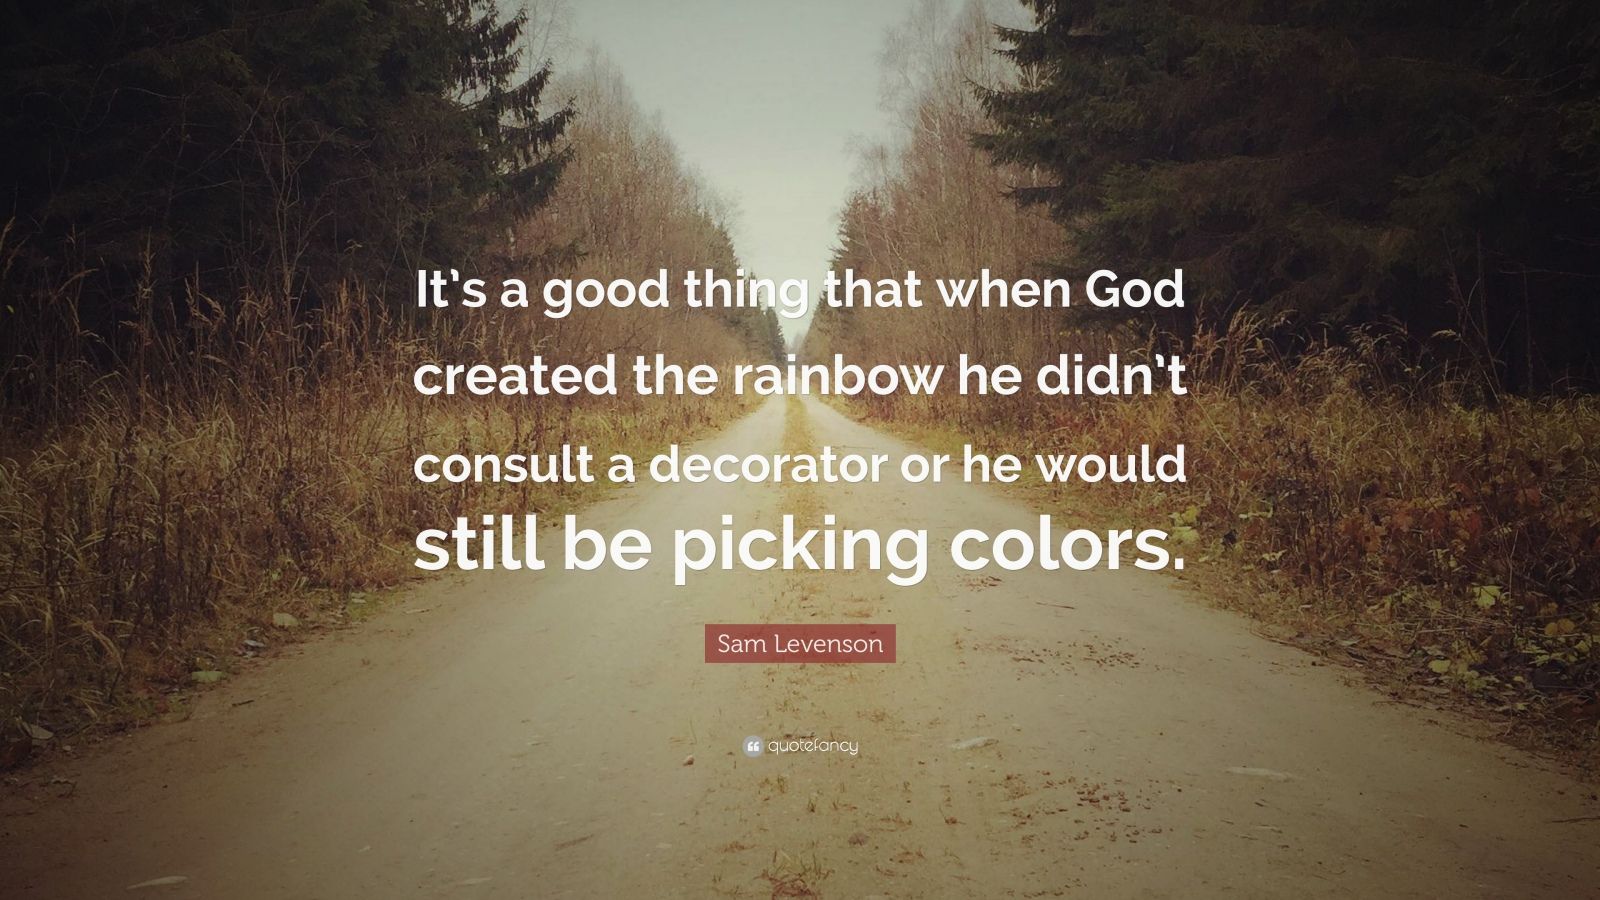 Sam Levenson Quote: "It's a good thing that when God ...